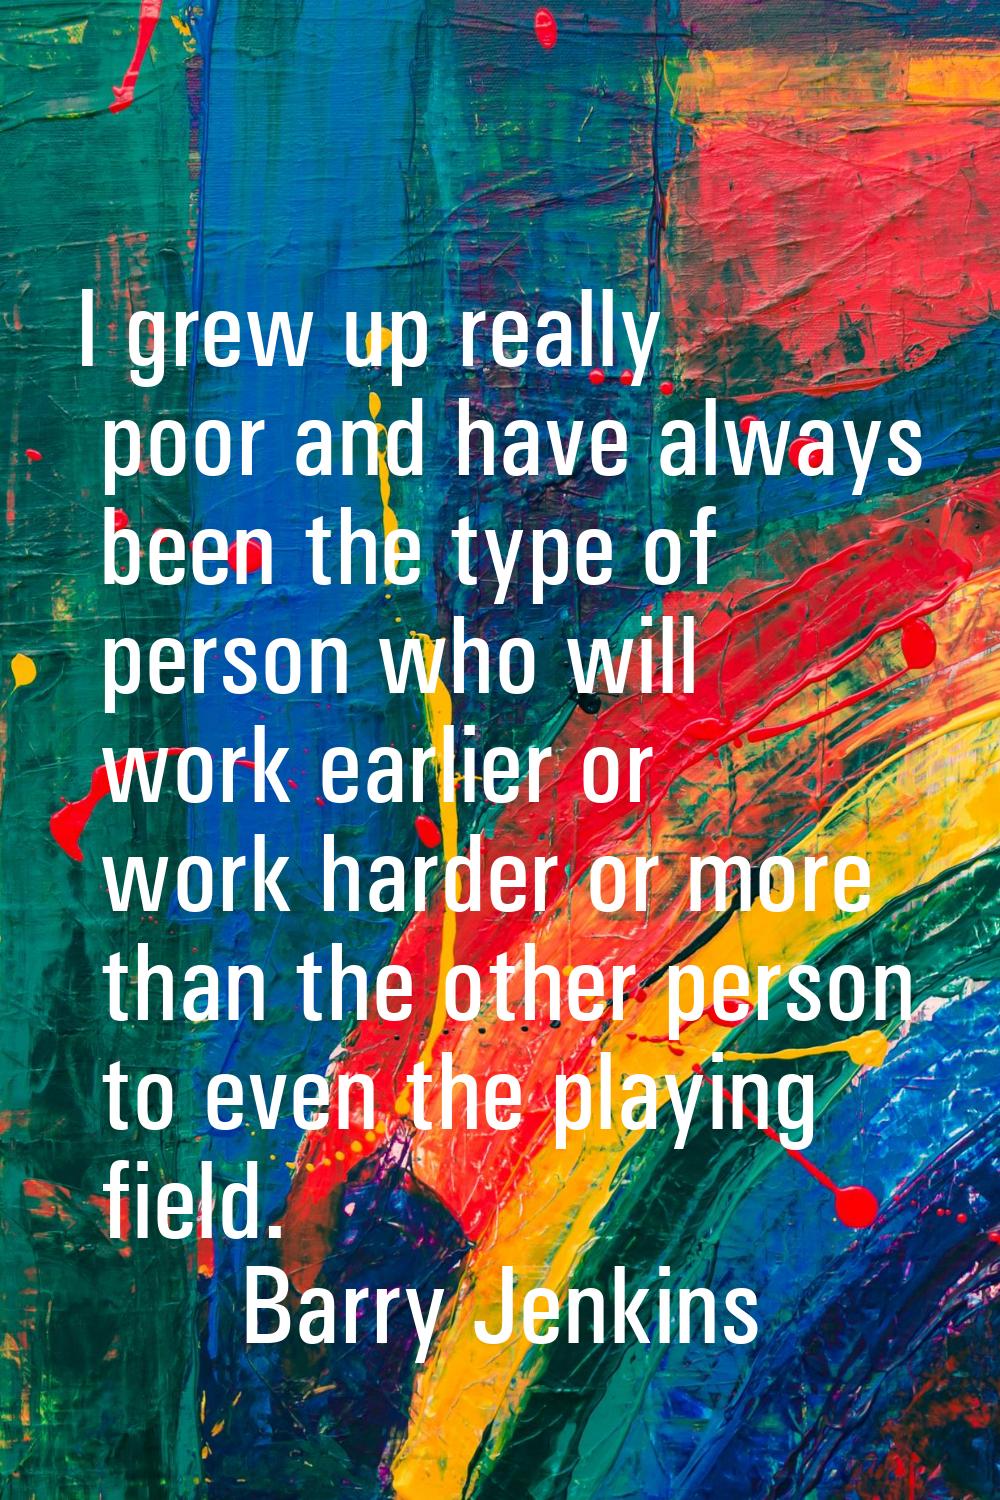 I grew up really poor and have always been the type of person who will work earlier or work harder 